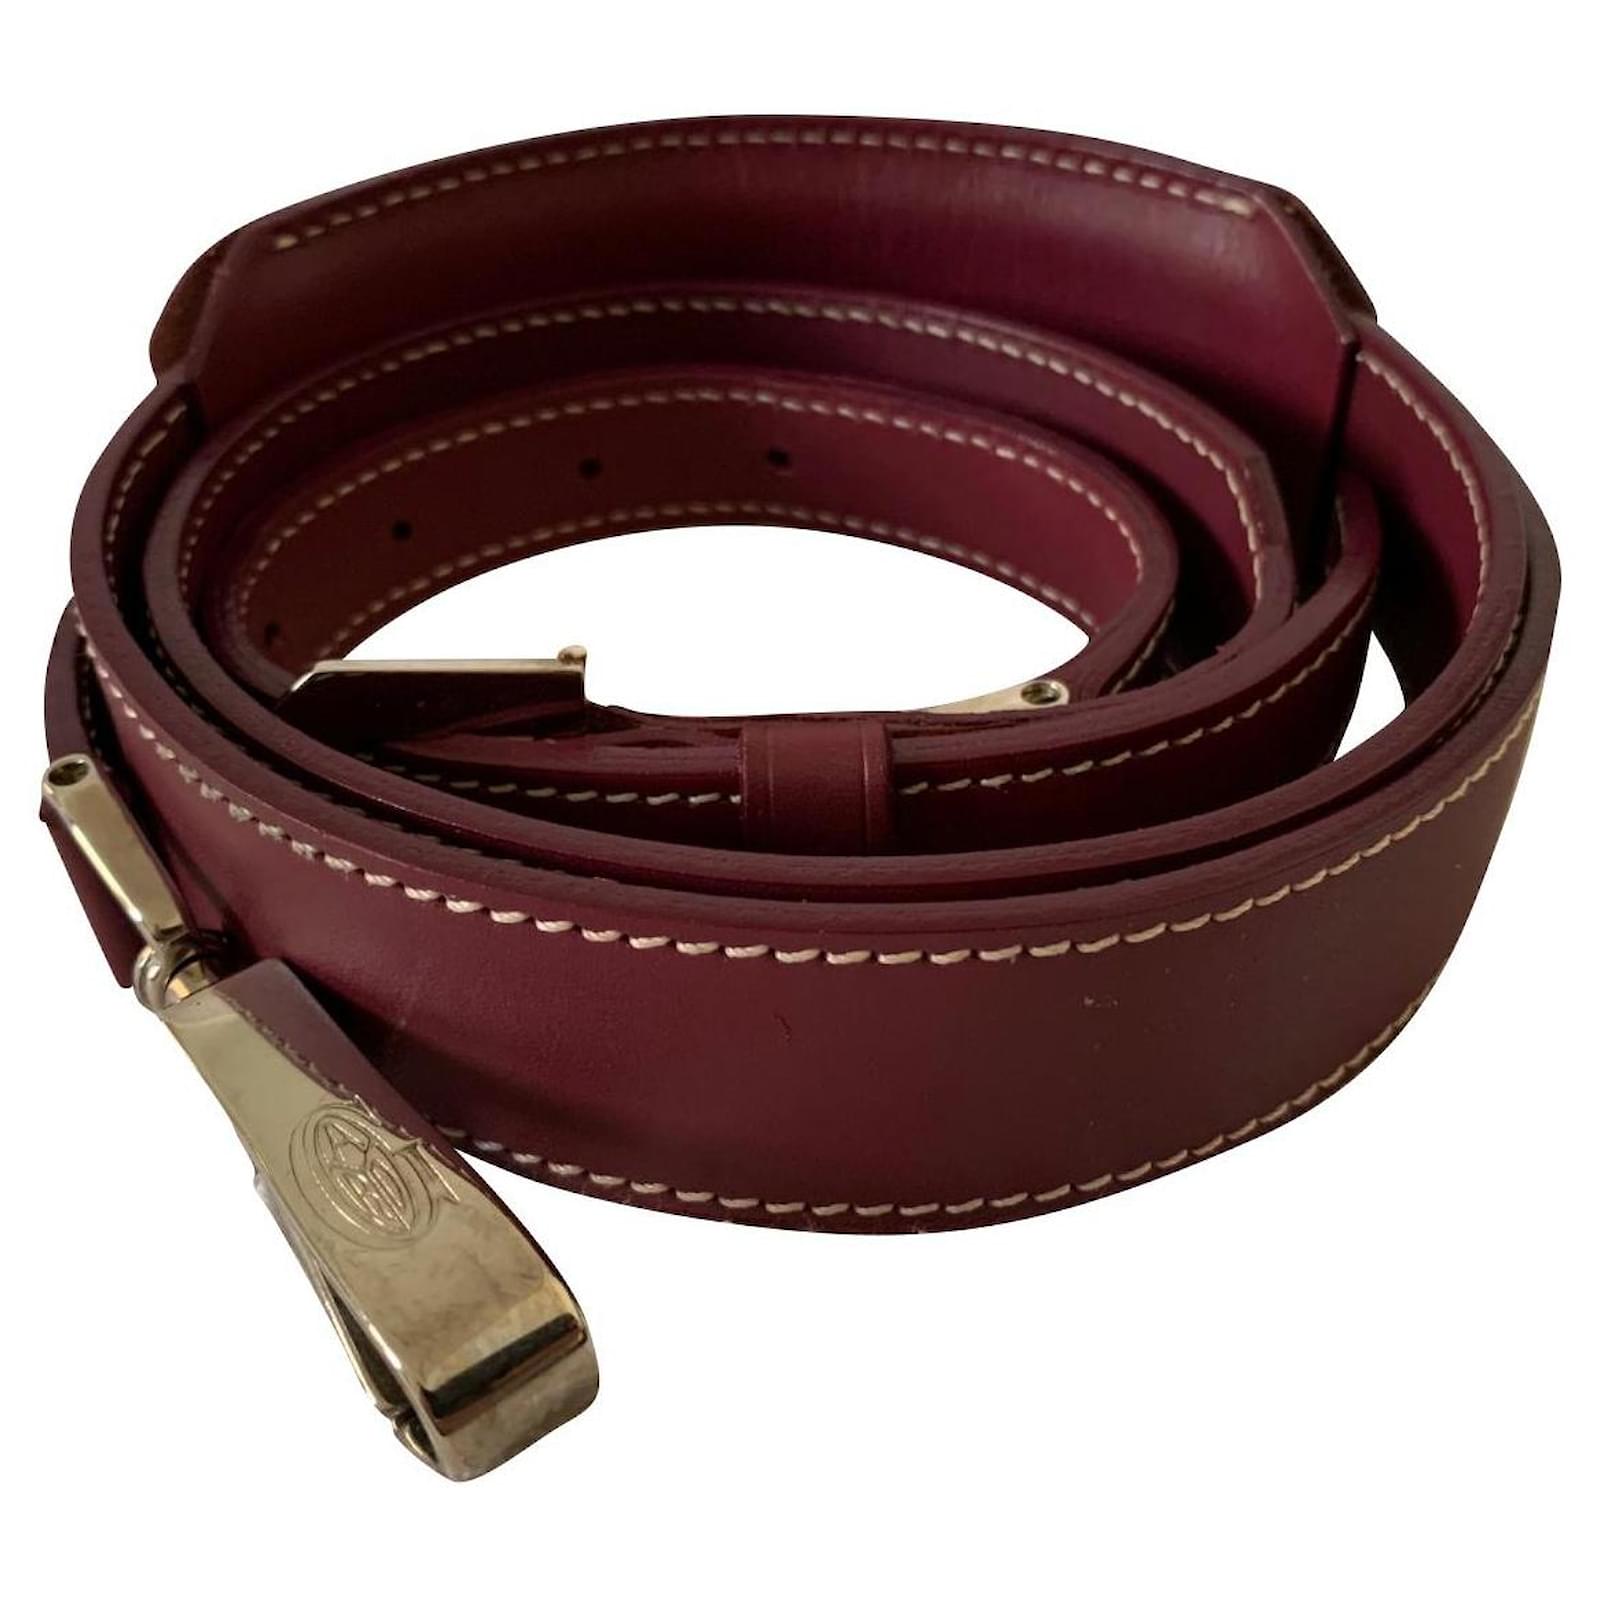 Goyard leather replacement strap for bags Dark red - Joli Closet